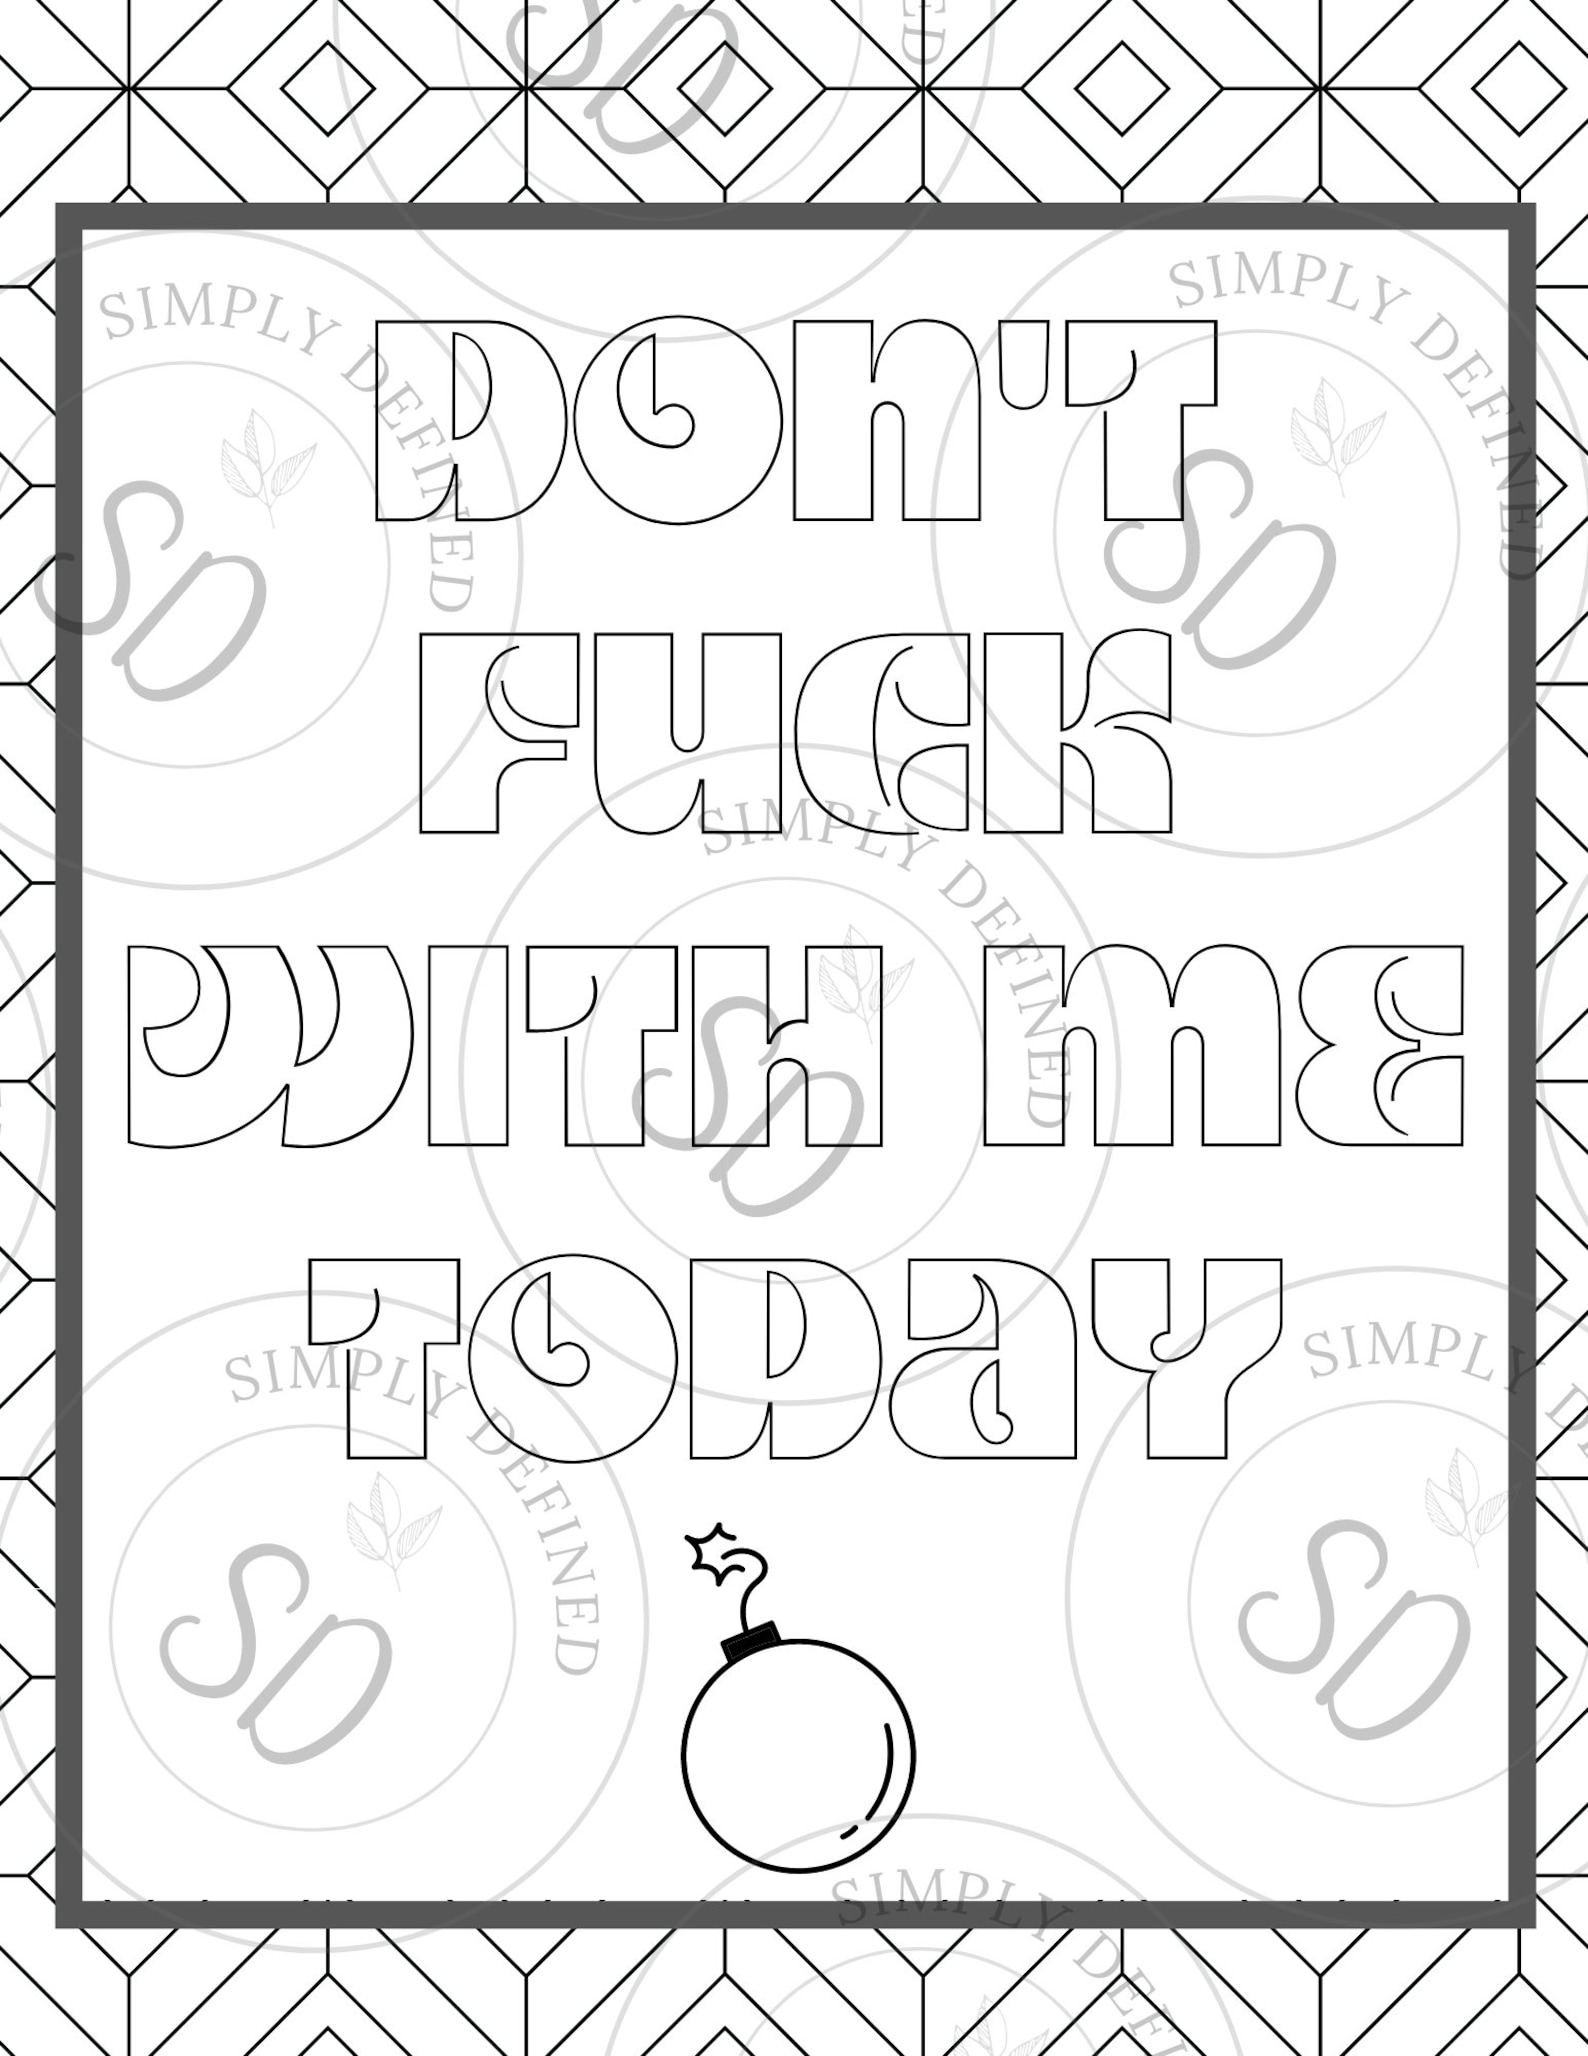 Be a Badass Adult Coloring Pages Printable Downloads - Etsy UK